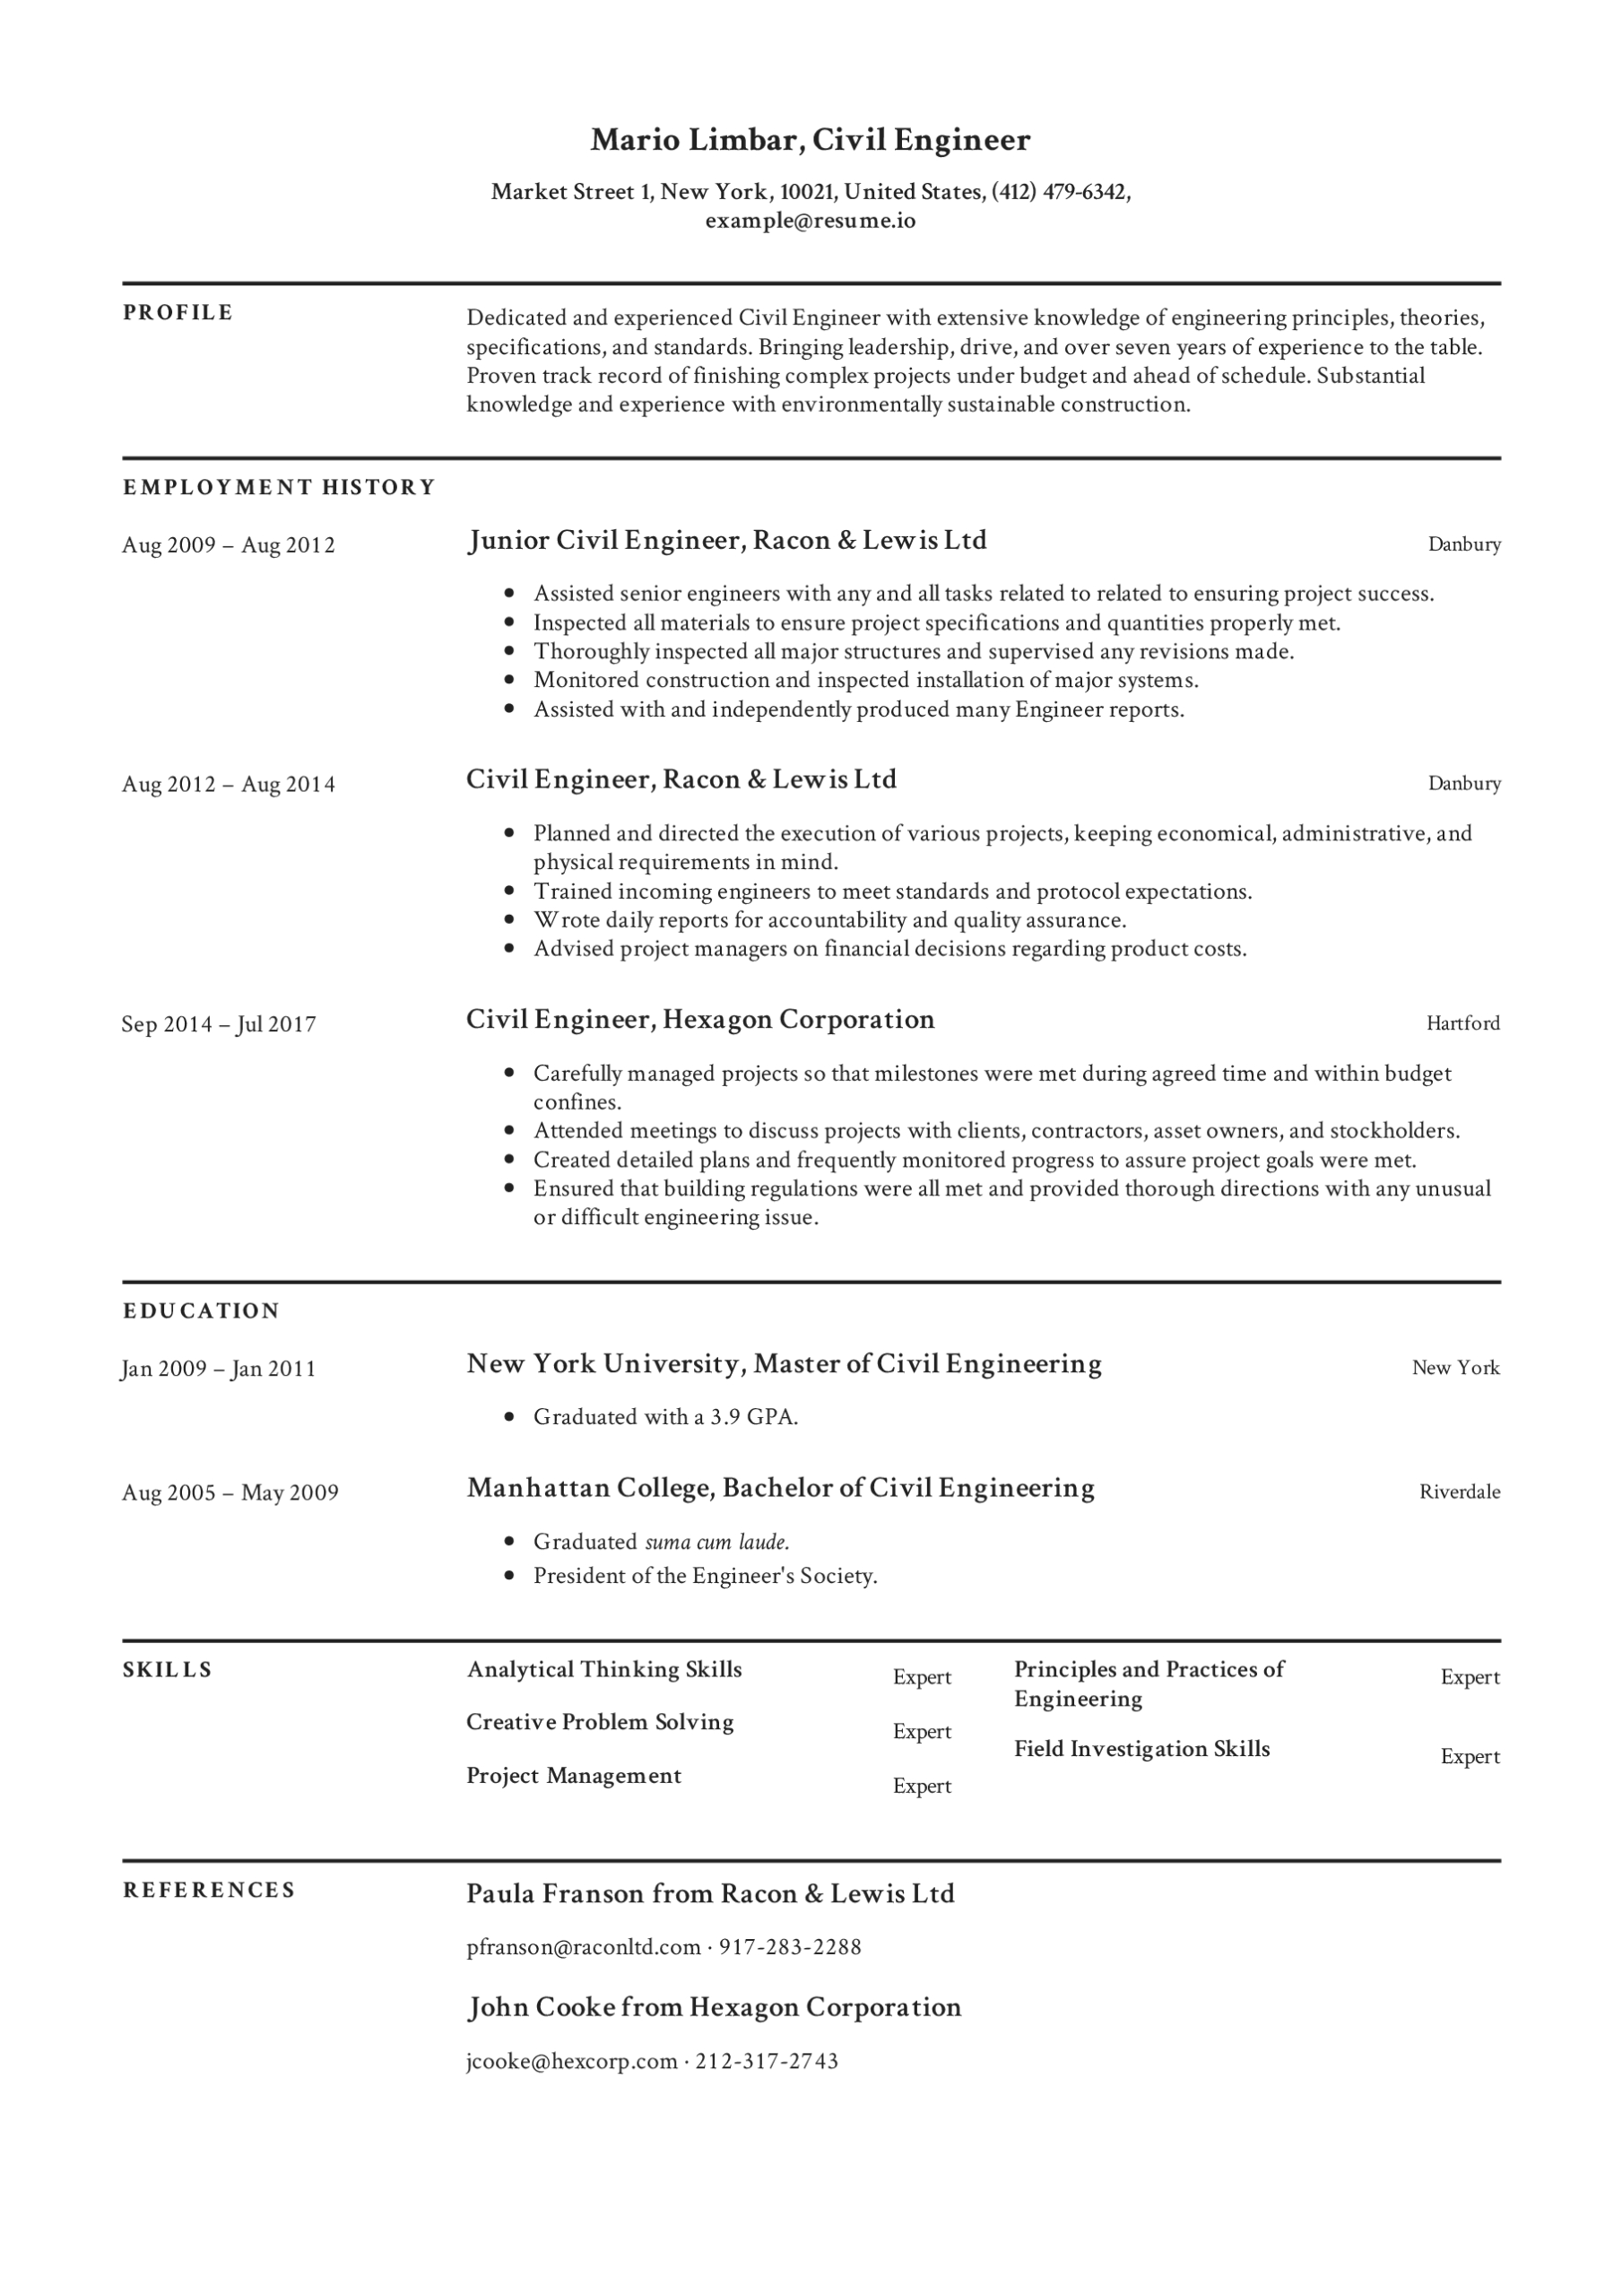 Civil Engineer Resume Templates 2020 (Free Download) · Resume.io Intended For Country Report Template Middle School